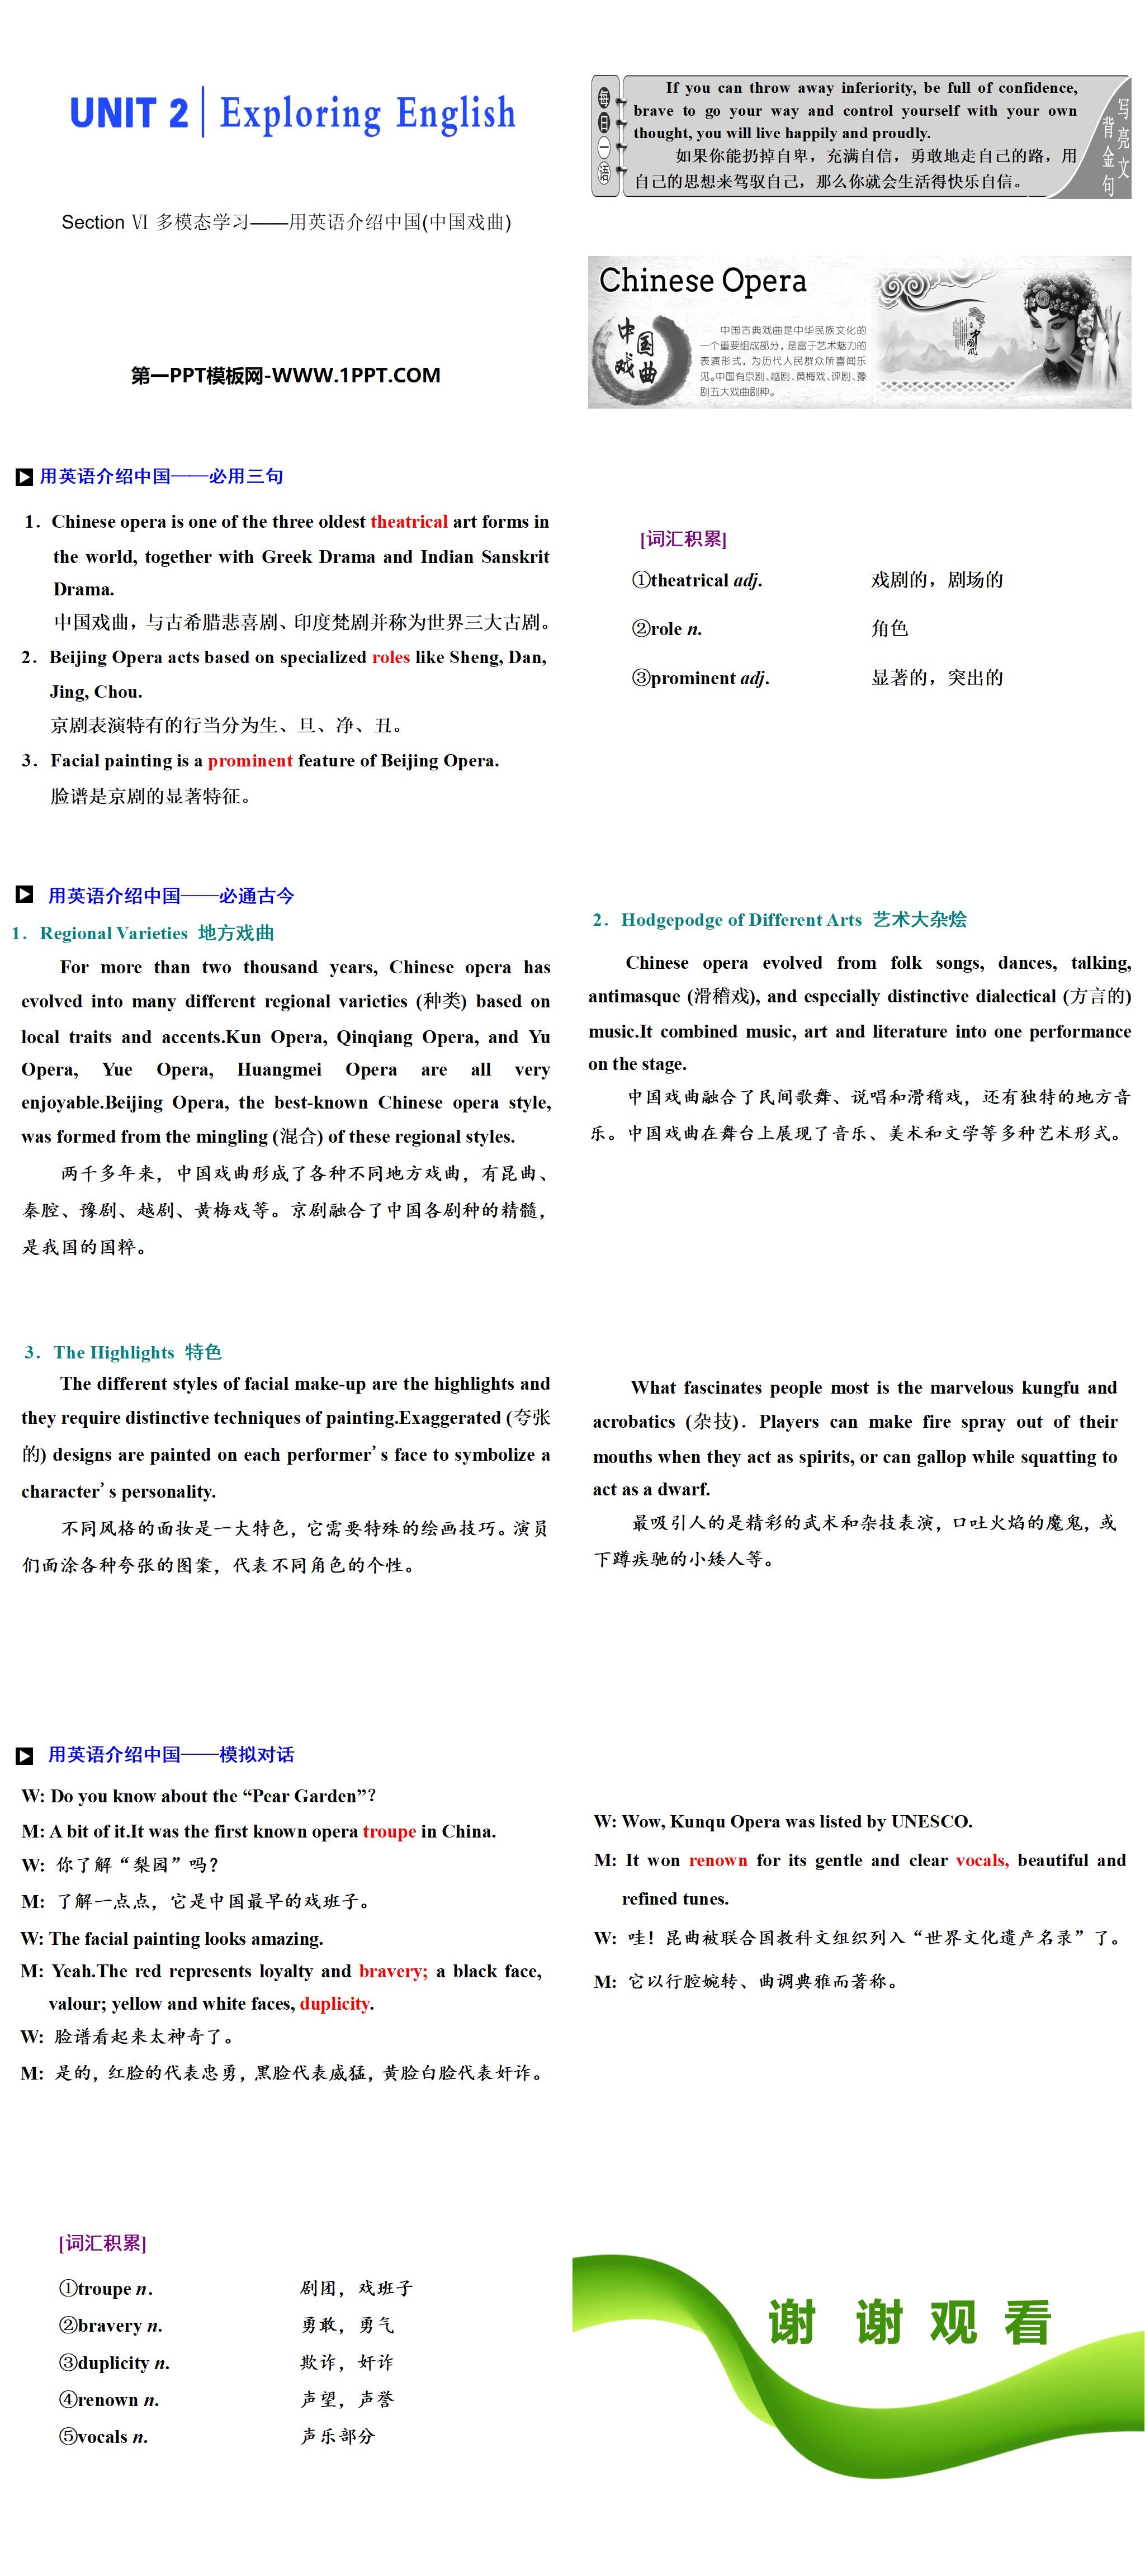 《Exploring English》Section Ⅵ PPT课件
（2）